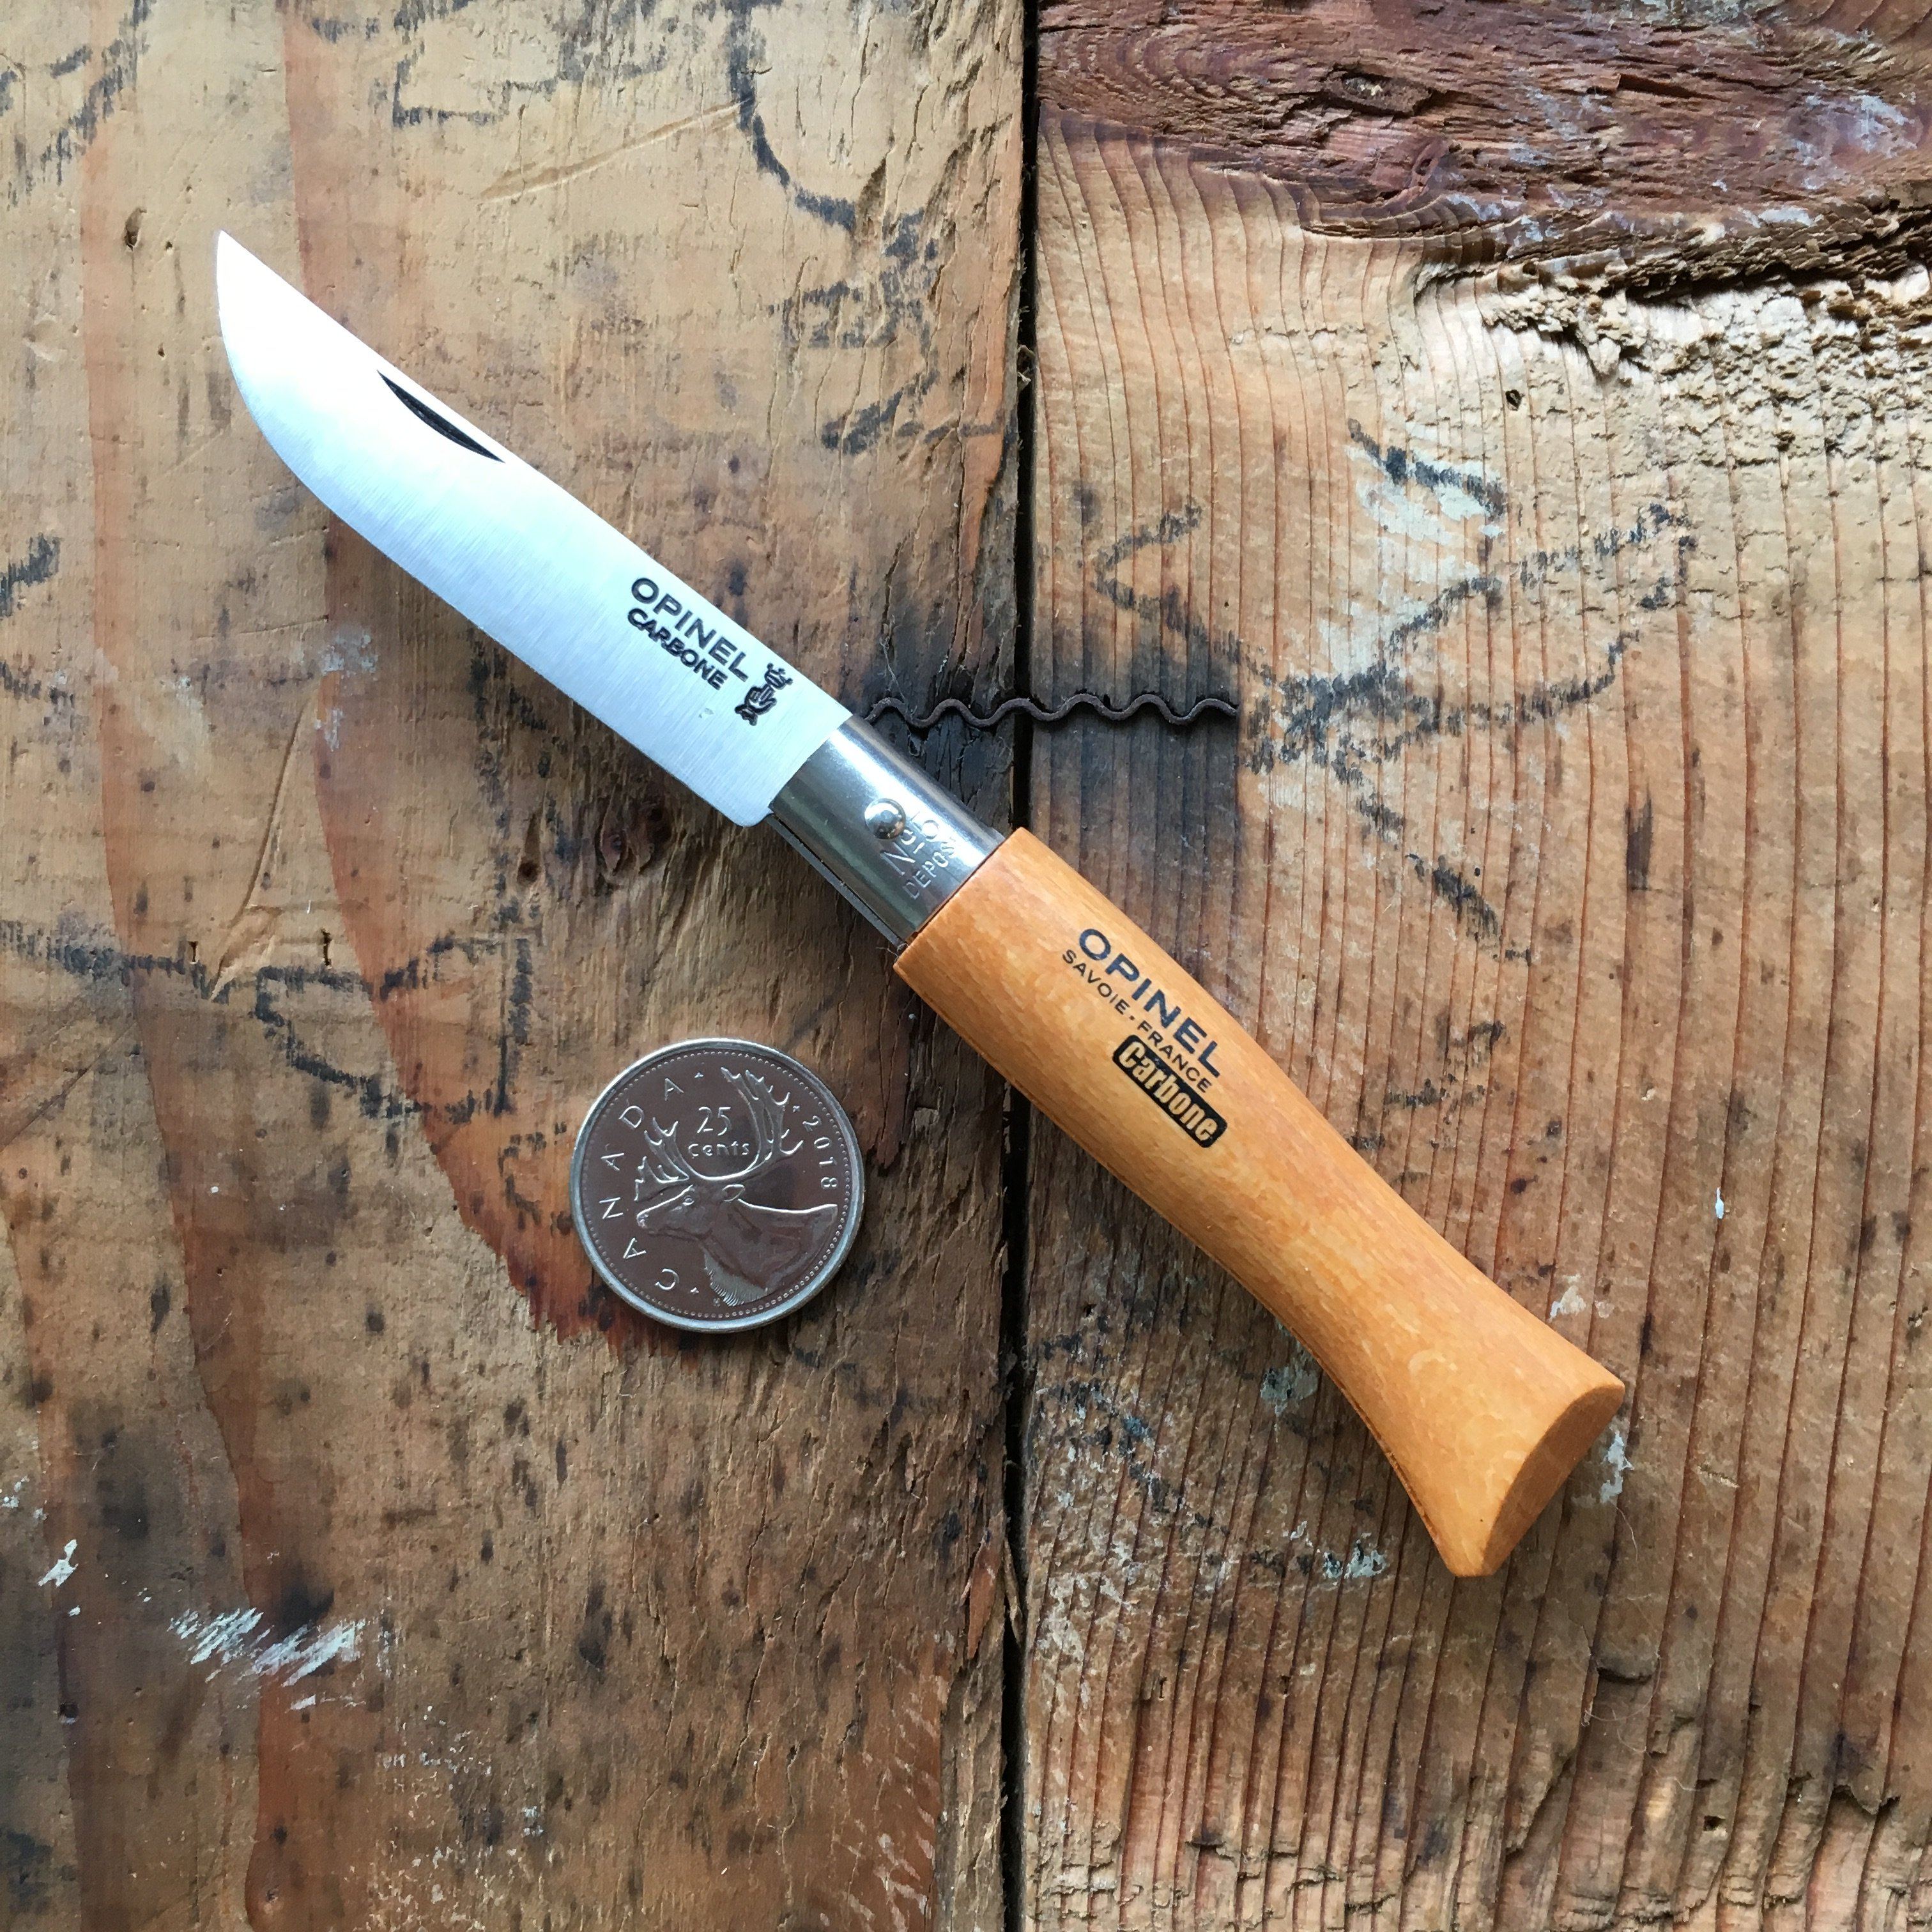 This restaurant gives you an Opinel as a steak knife. : r/knifeclub